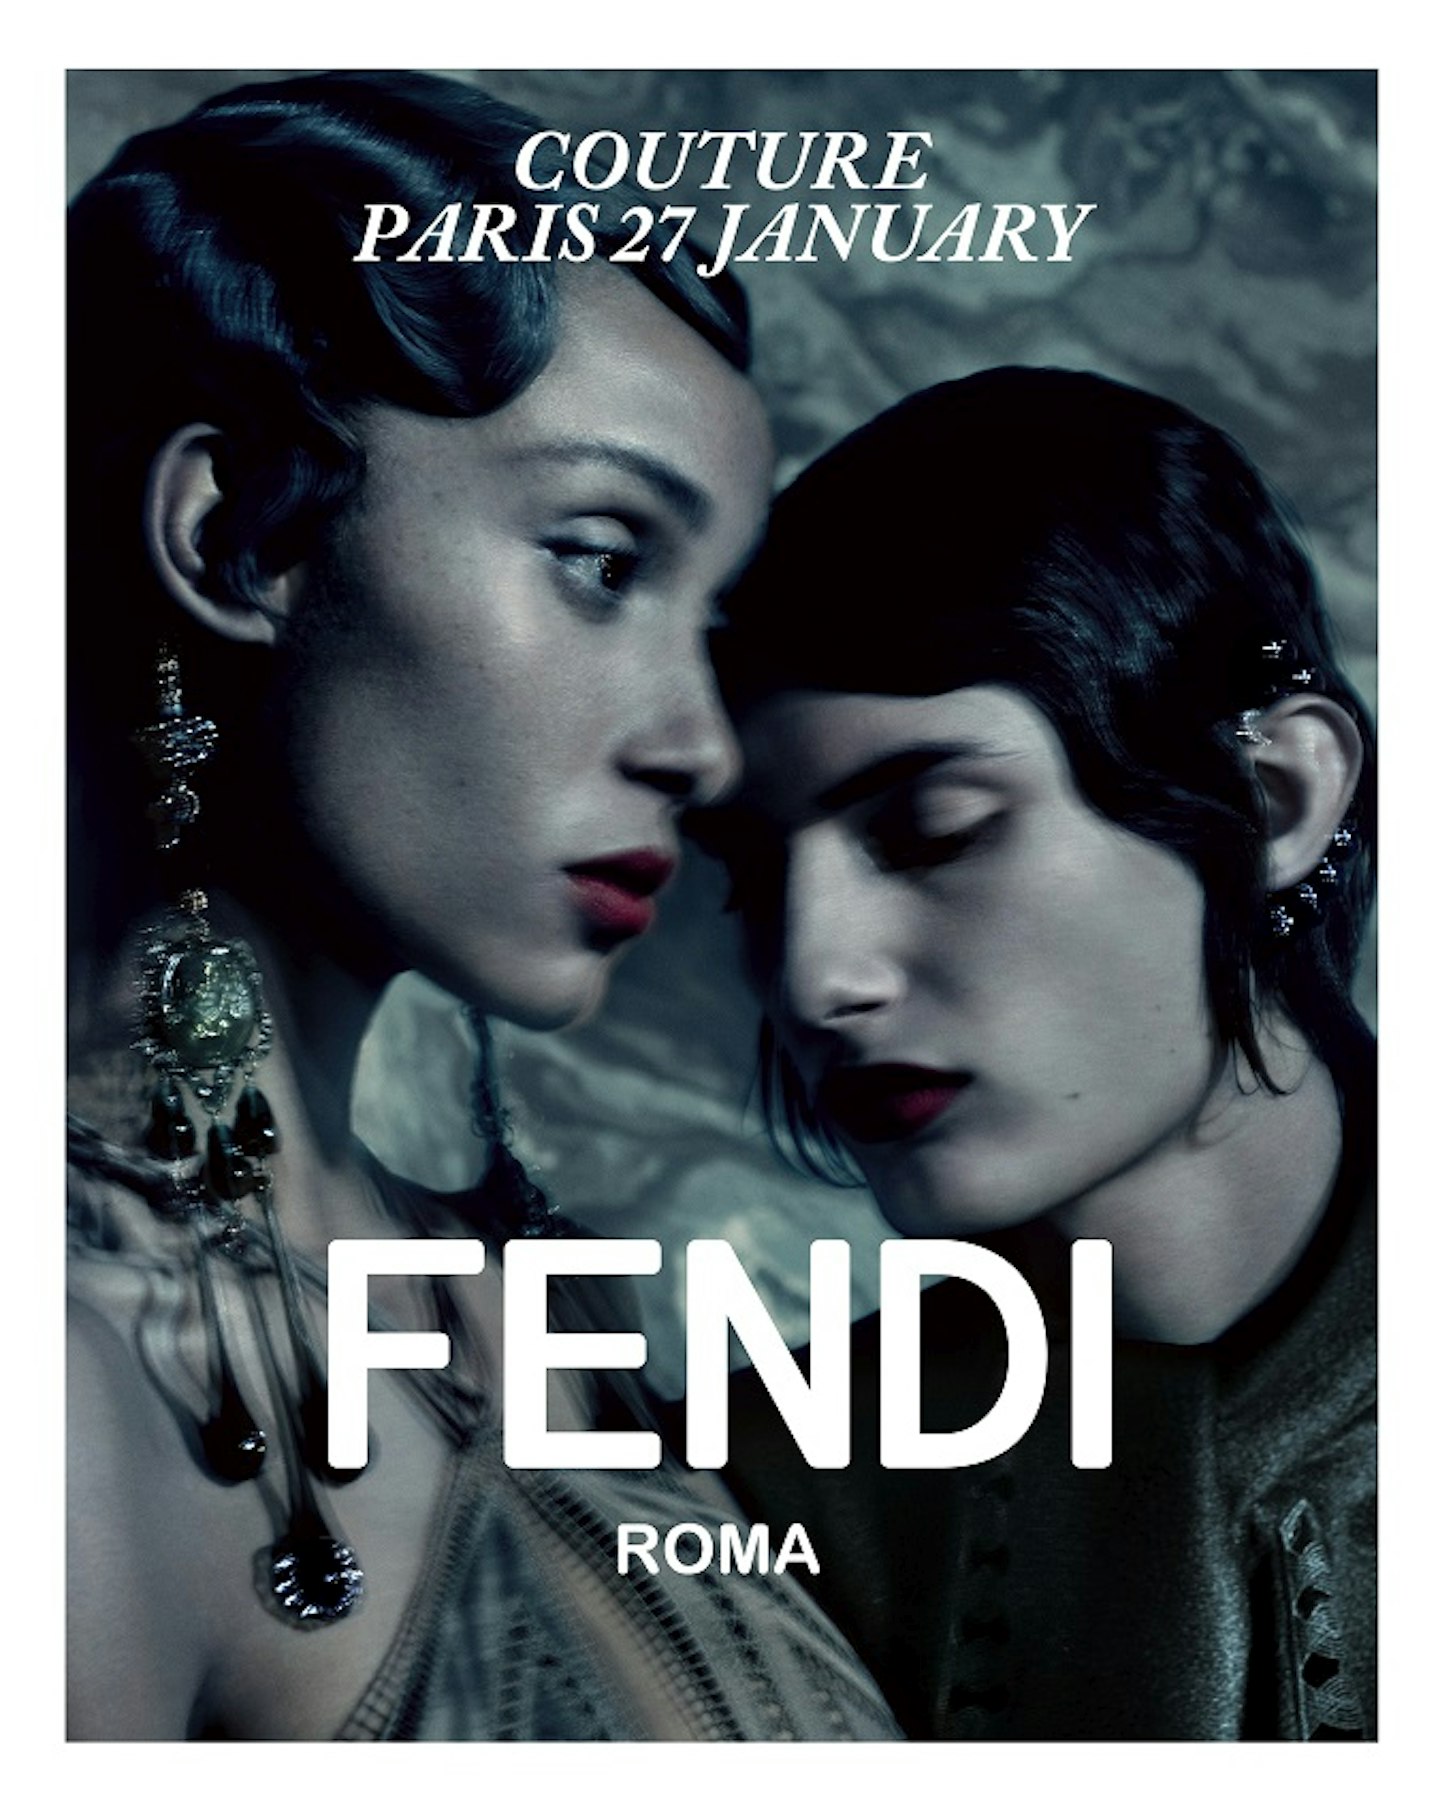 The teaser for Kim Jones' debut Fendi Couture collection